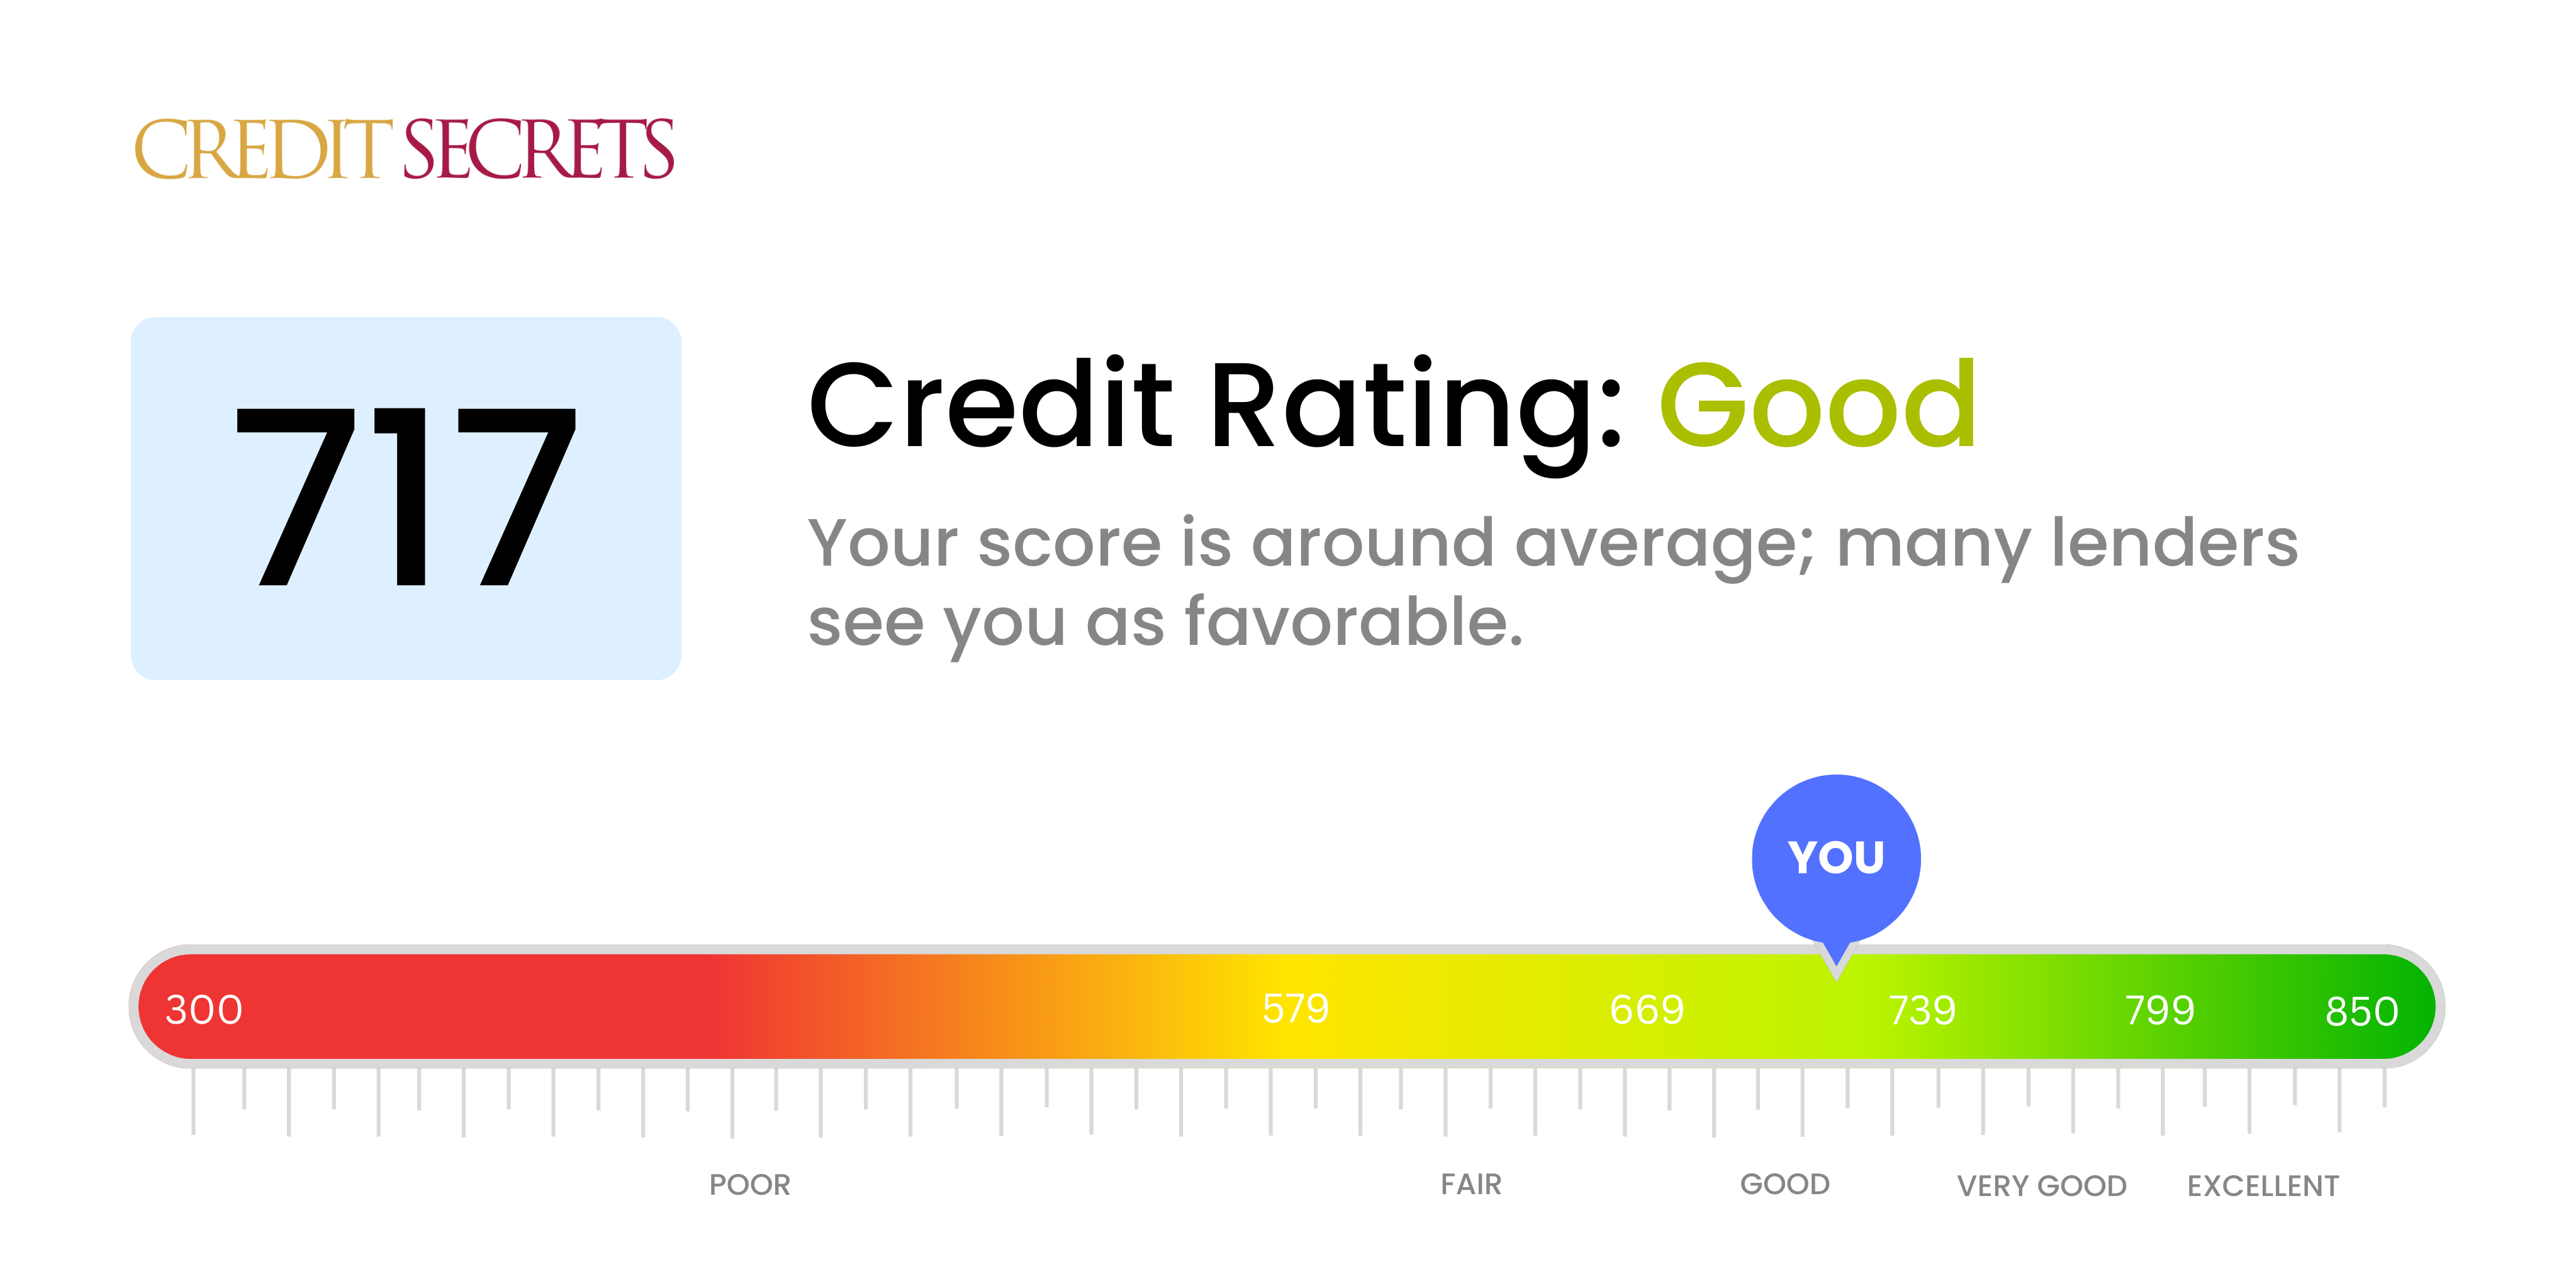 Is 717 a good credit score?